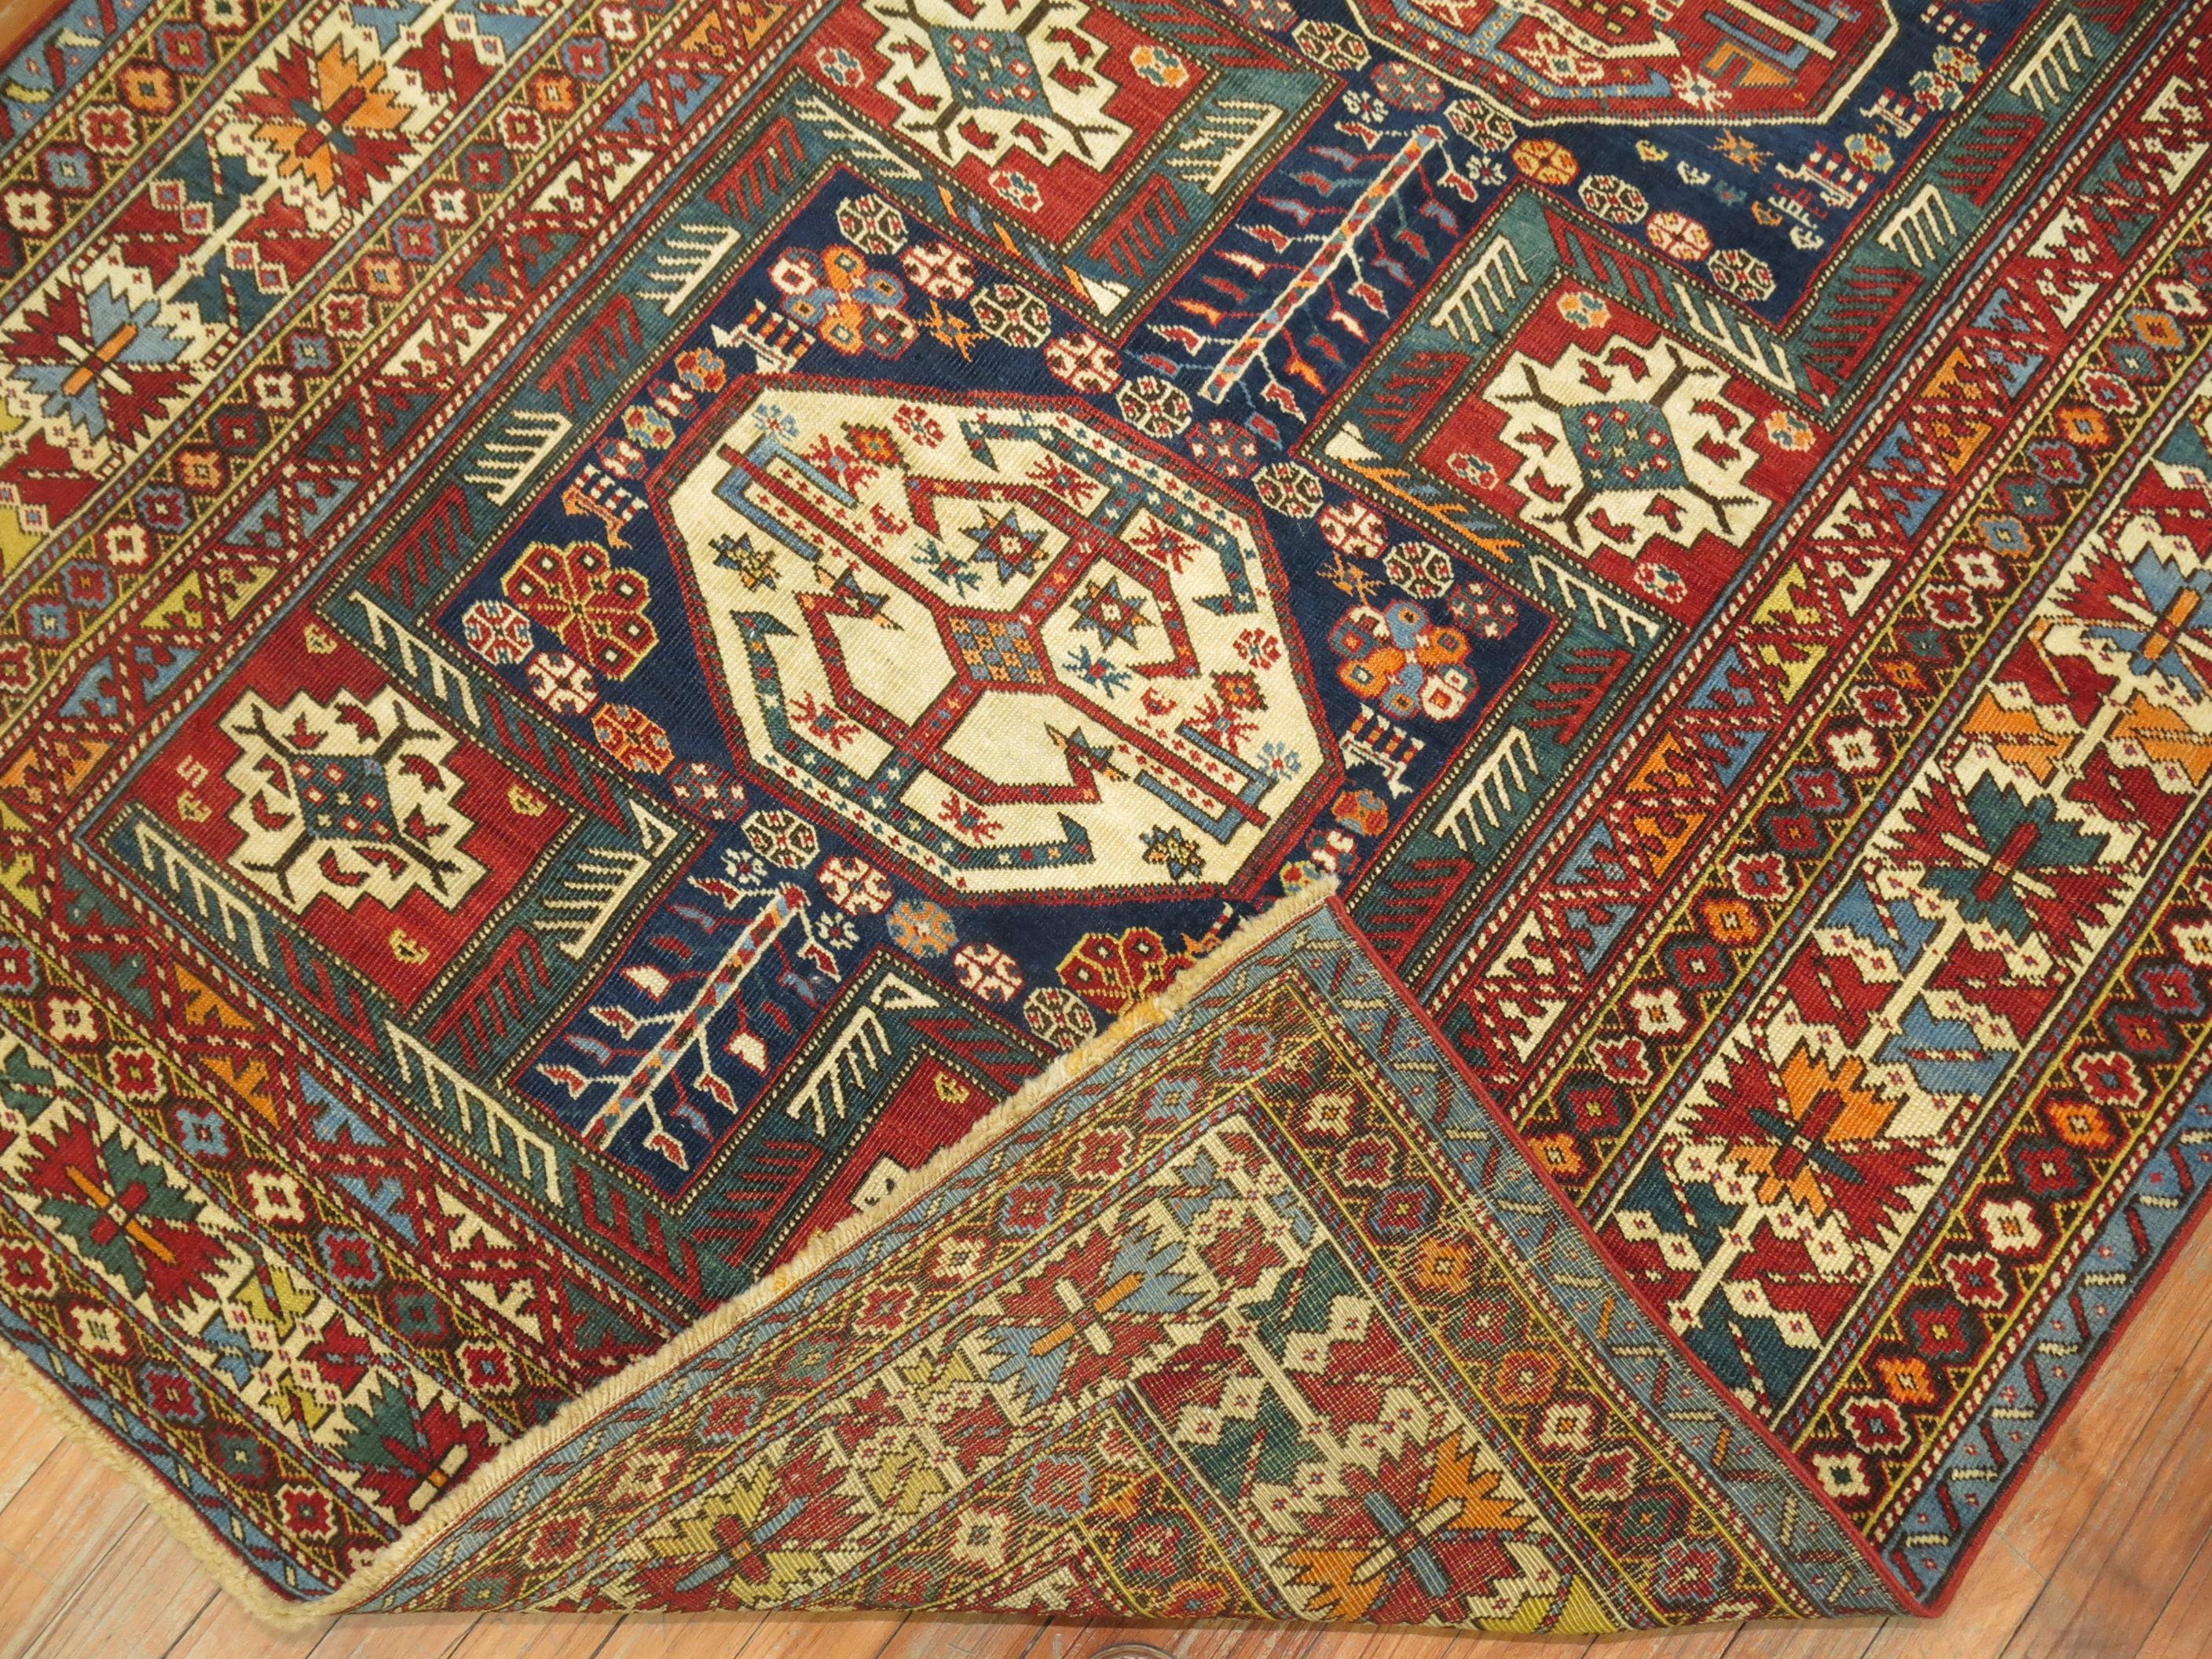 An intermediate size late 19th century antique Shirvan rug woven in the Caucasian mountainous region.

Measures: 4'8'' x 8'.